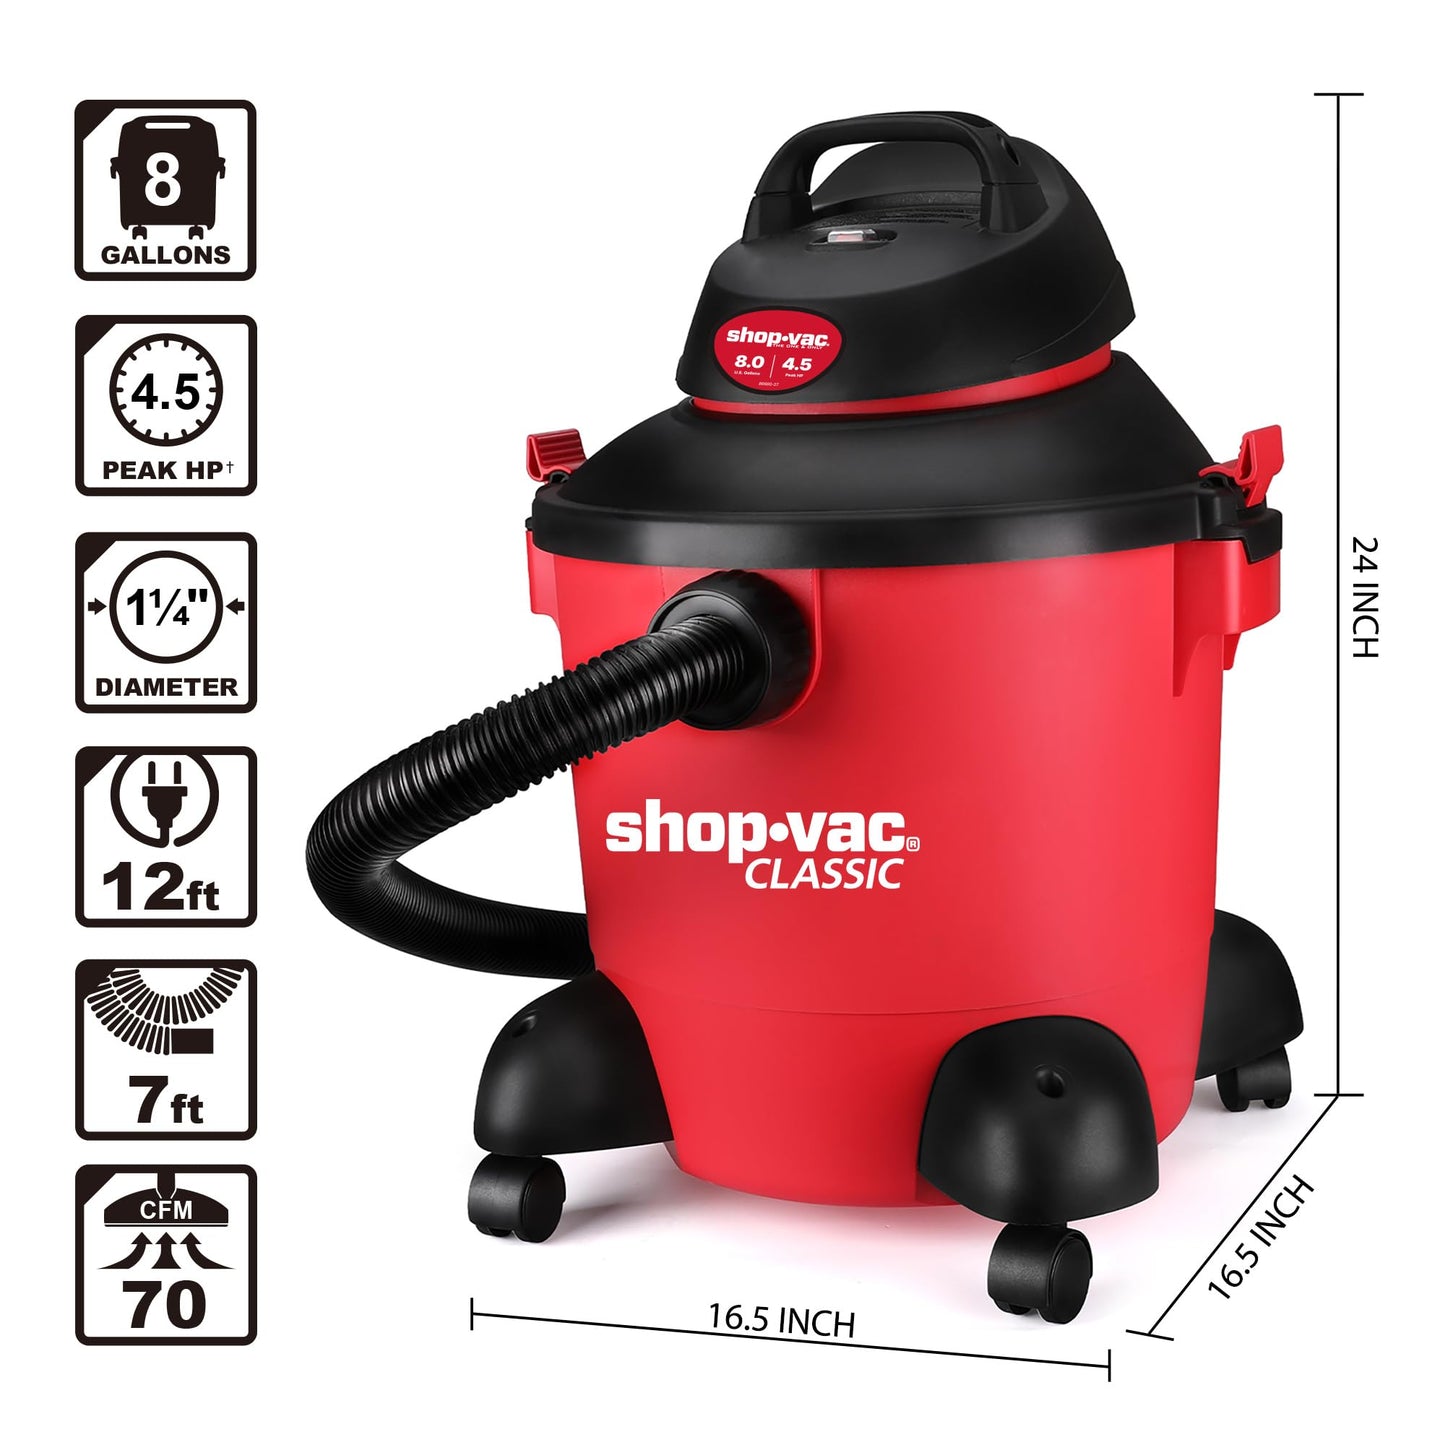 Shop-Vac 8 Gallon 4.5-Peak HP Wet/Dry Vacuum, 3 in 1 Function with Filter, Hose and Accessories, Ideal for Jobsite, Garage, Car & Workshop. 5971836